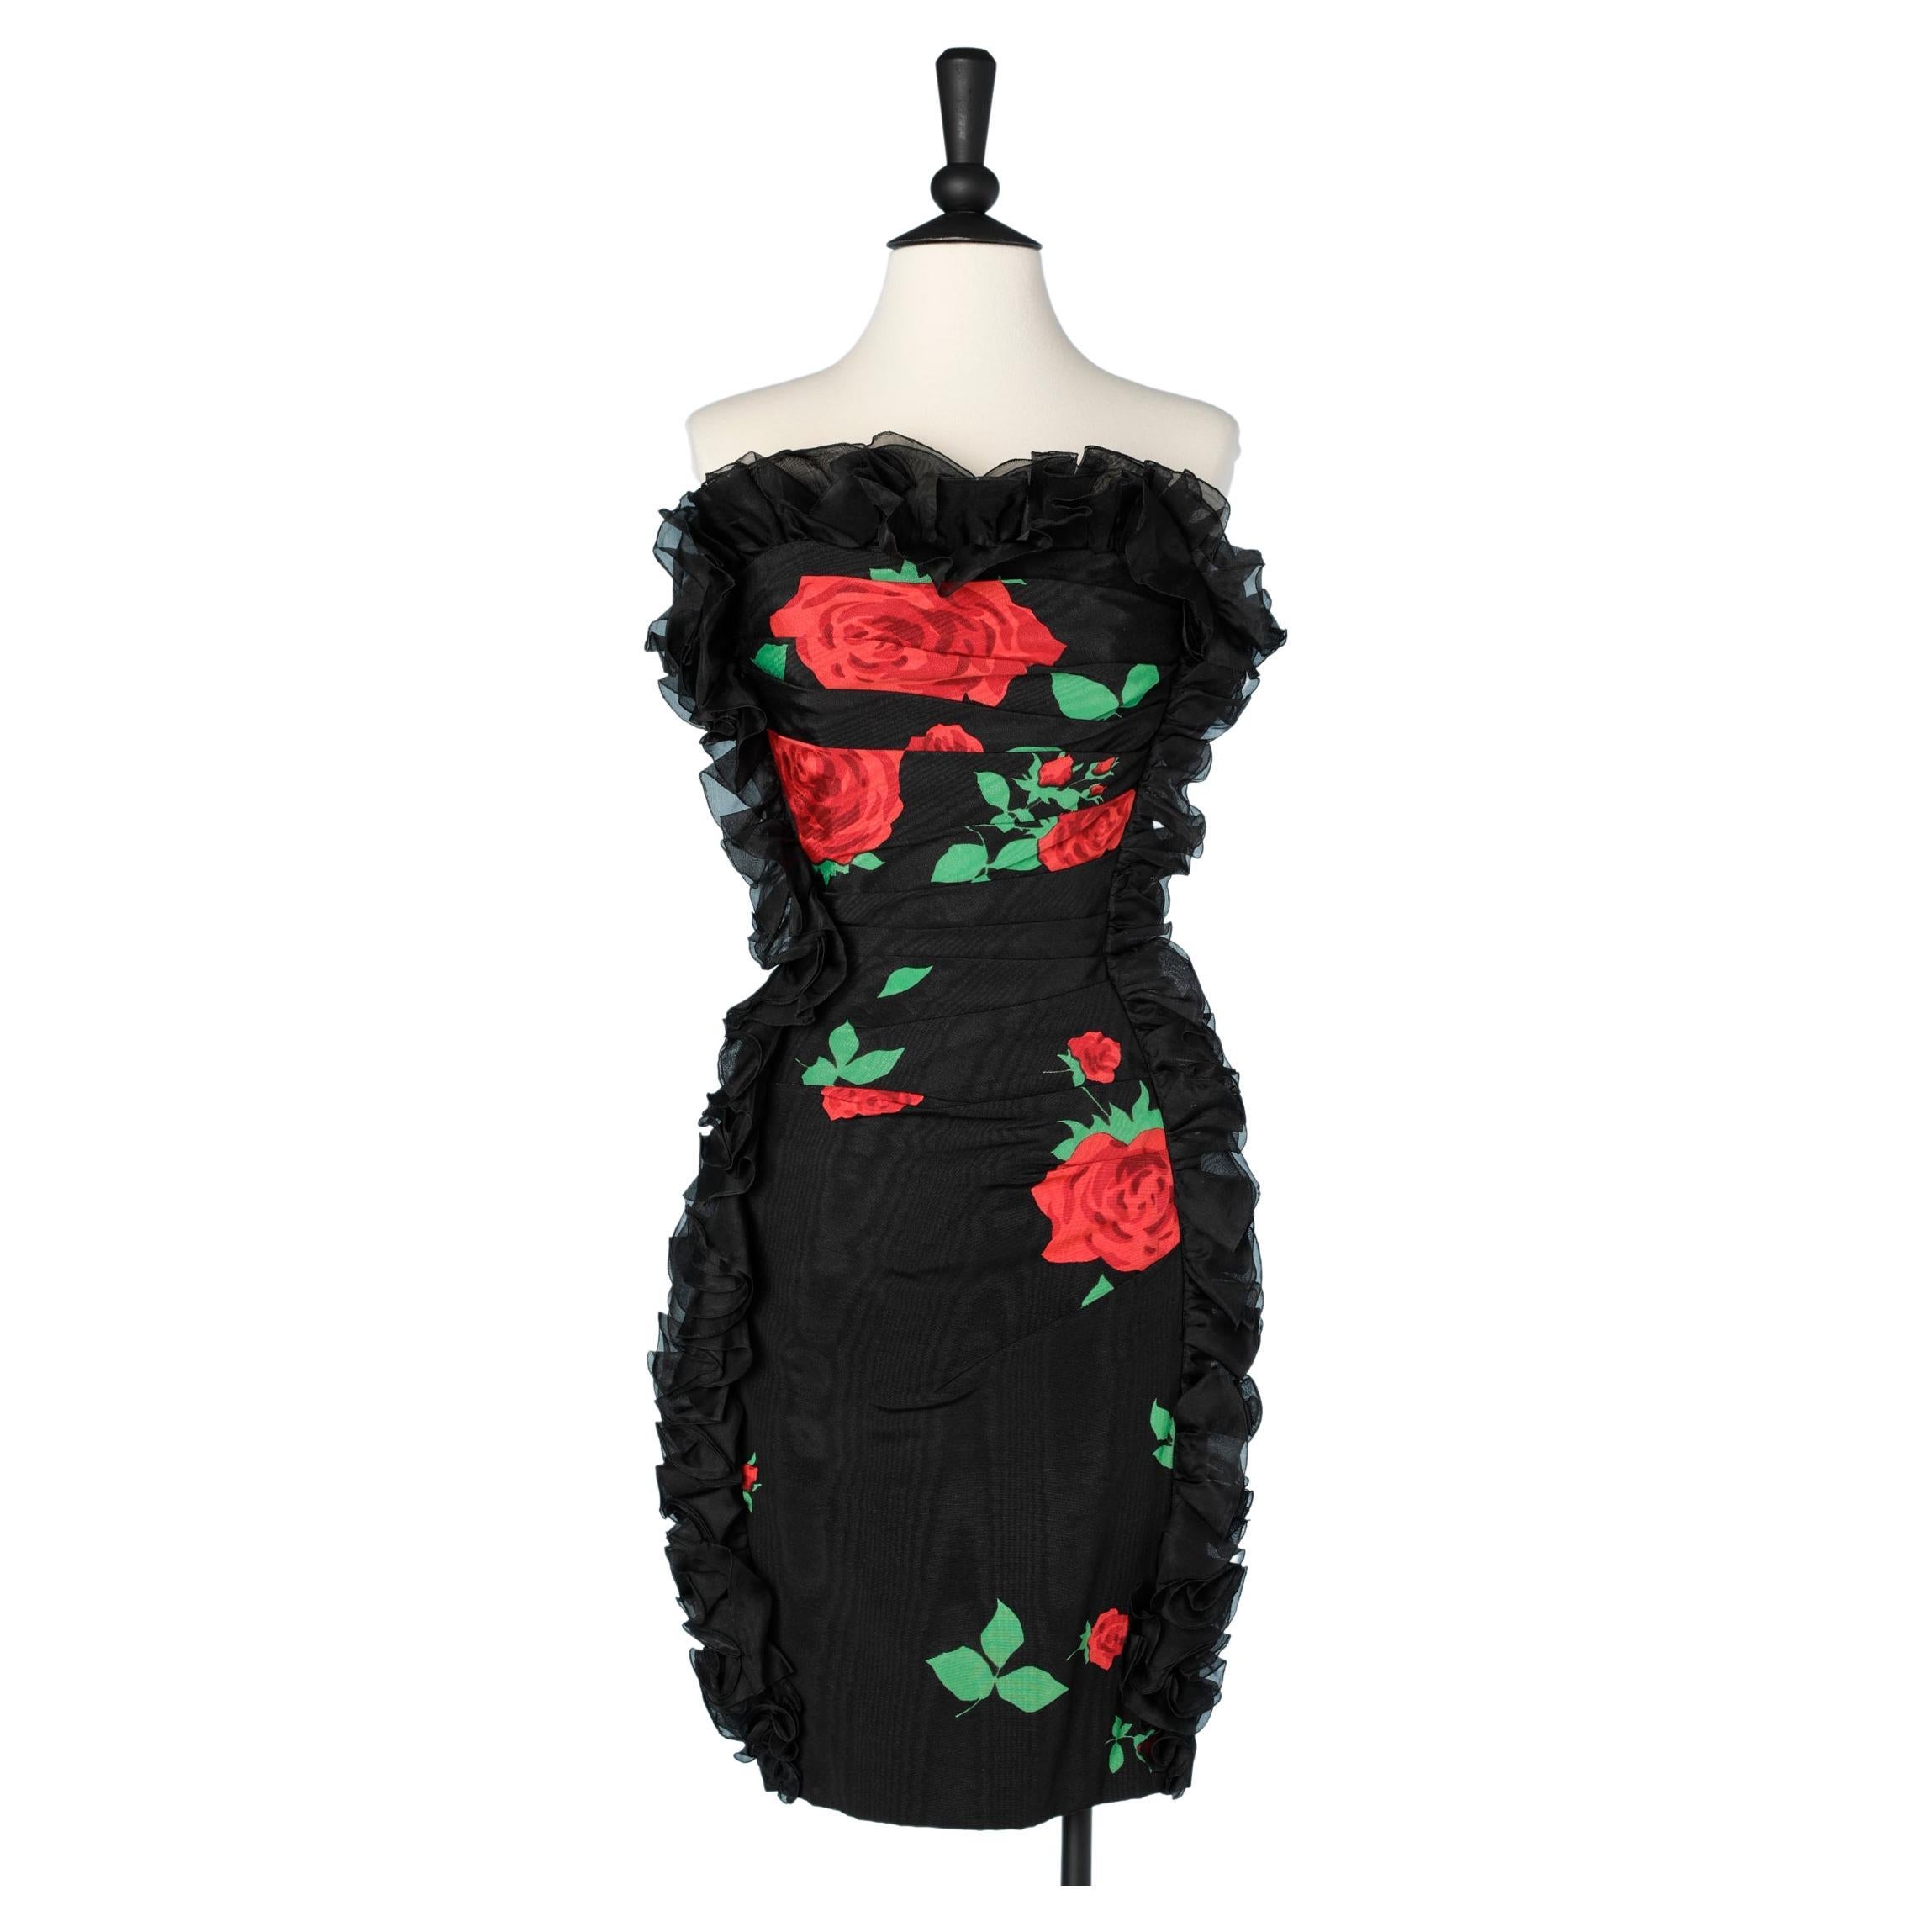 Black bustier dress with red roses printed and black chiffon ruffles Ungaro 